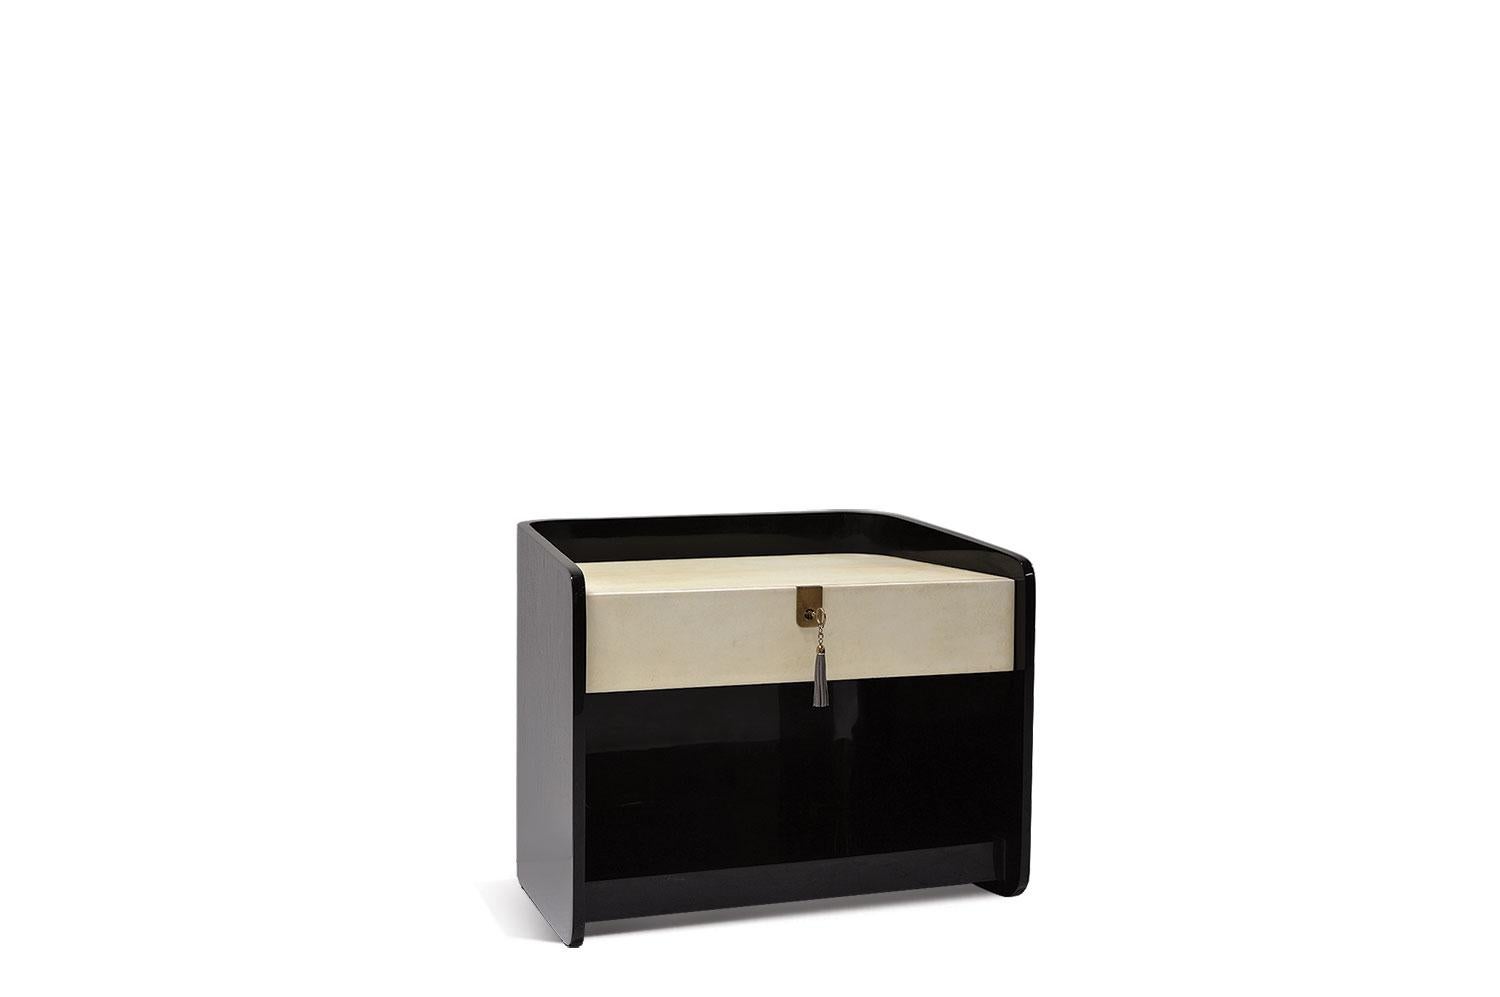 High gloss black lacquered mahogany wood bedside nightstand or side table with goatskin surface and drawer face. Goatskin and wood finish options are available for made to order requests.